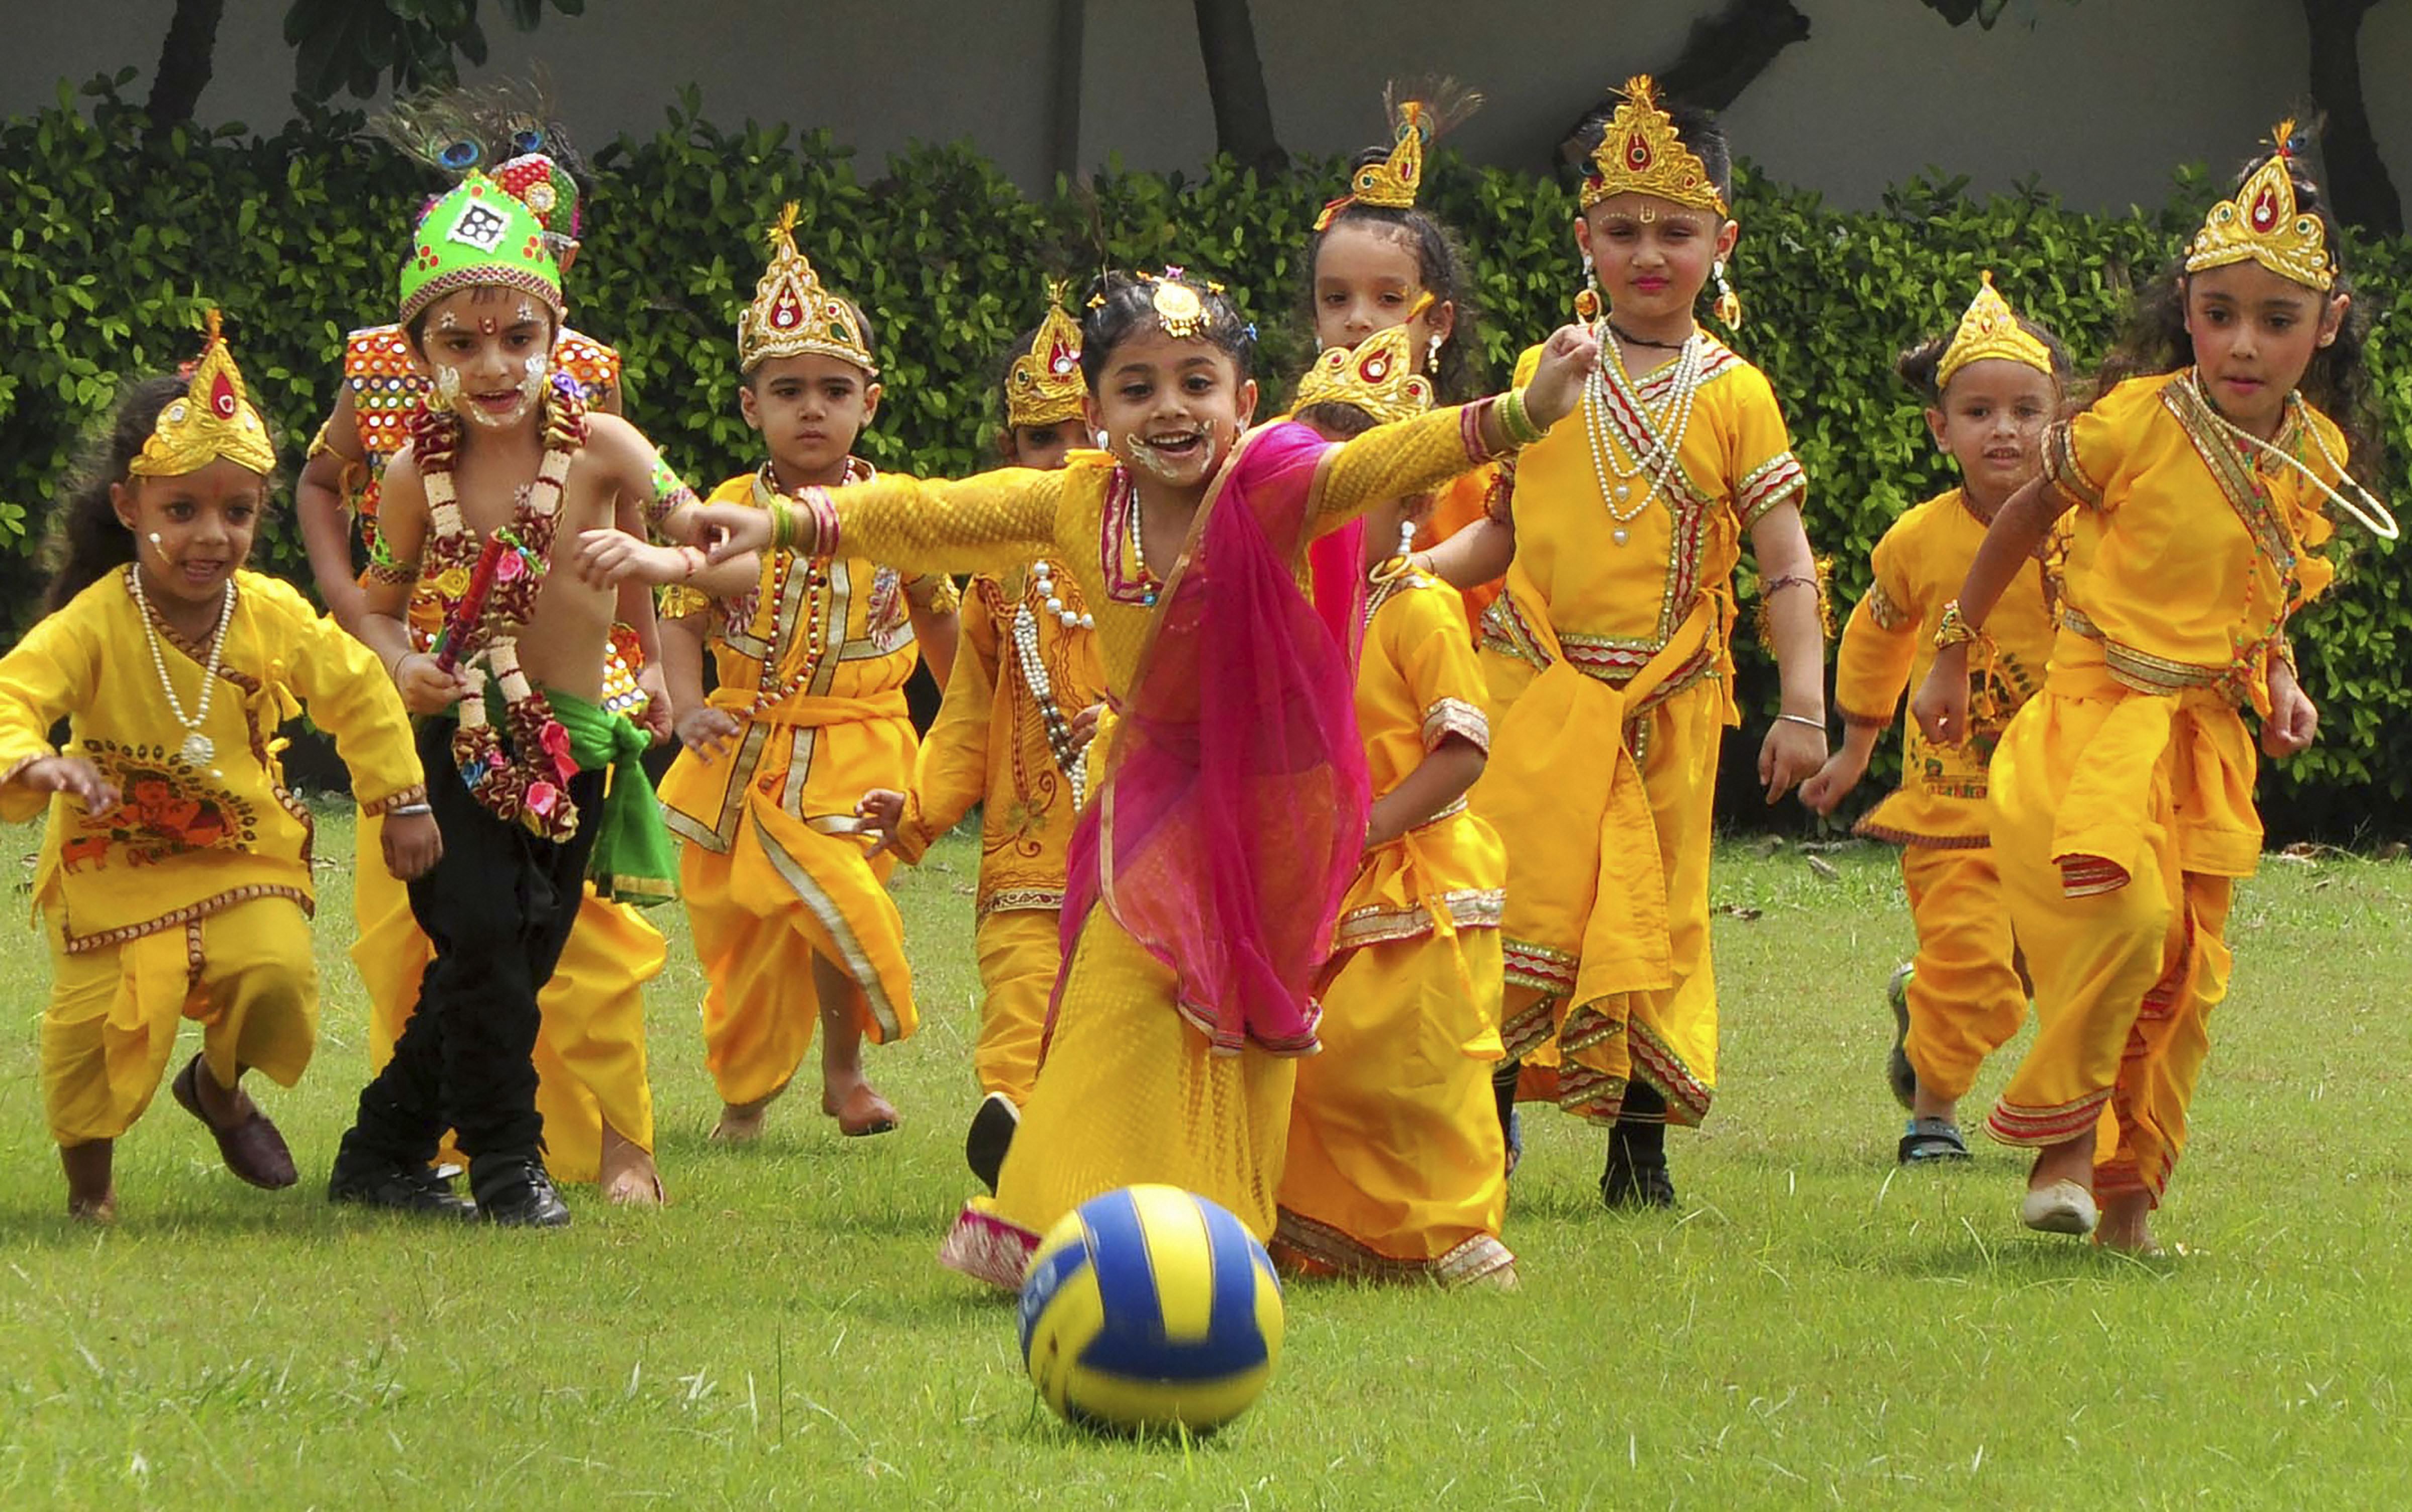 Children dressed up as Lord Krishna play football during 'Janmashtami' celebrations at a school, in Patiala - PTI